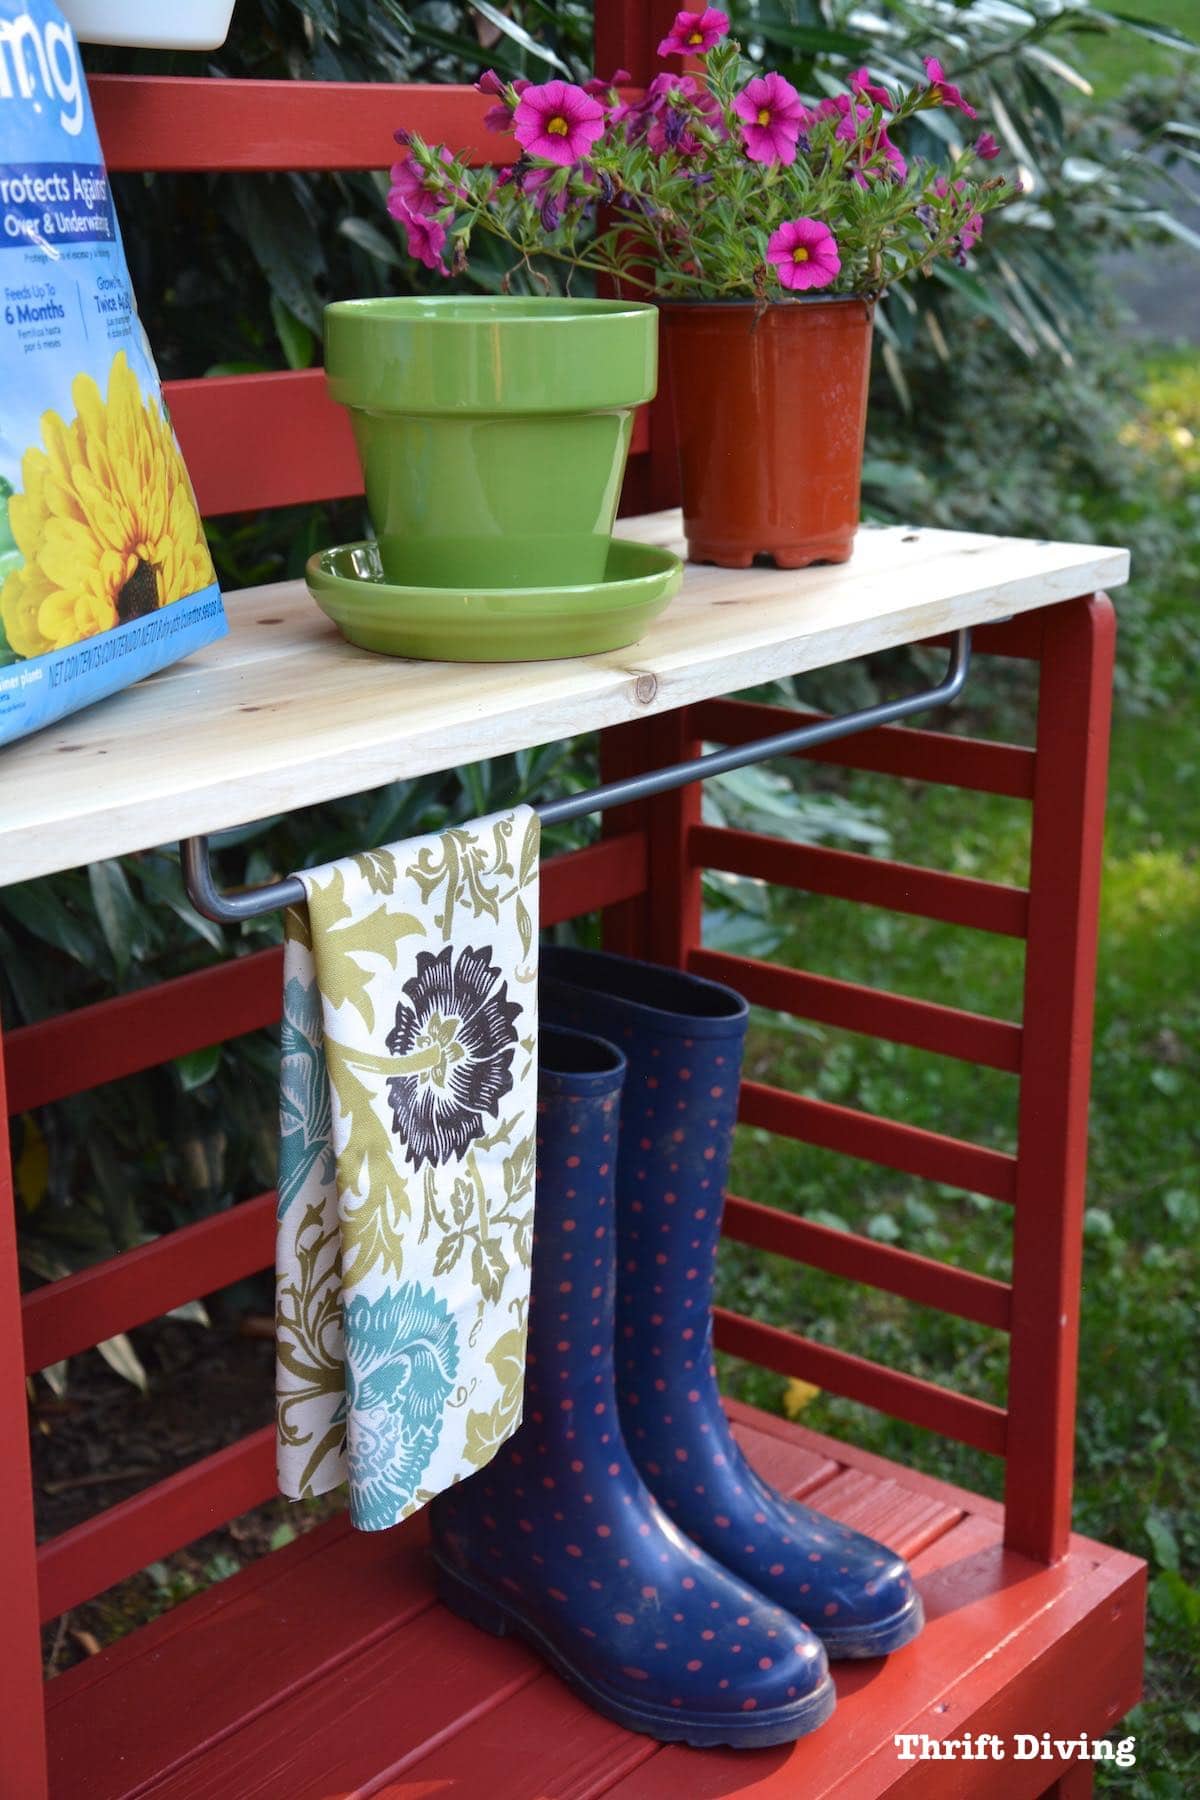 Repurposed toddler bed: What to do with an old toddler bed - Turn a toddler bed into a garden bench for your patio with shelving, storage, and towel bar. - Thrift Diving